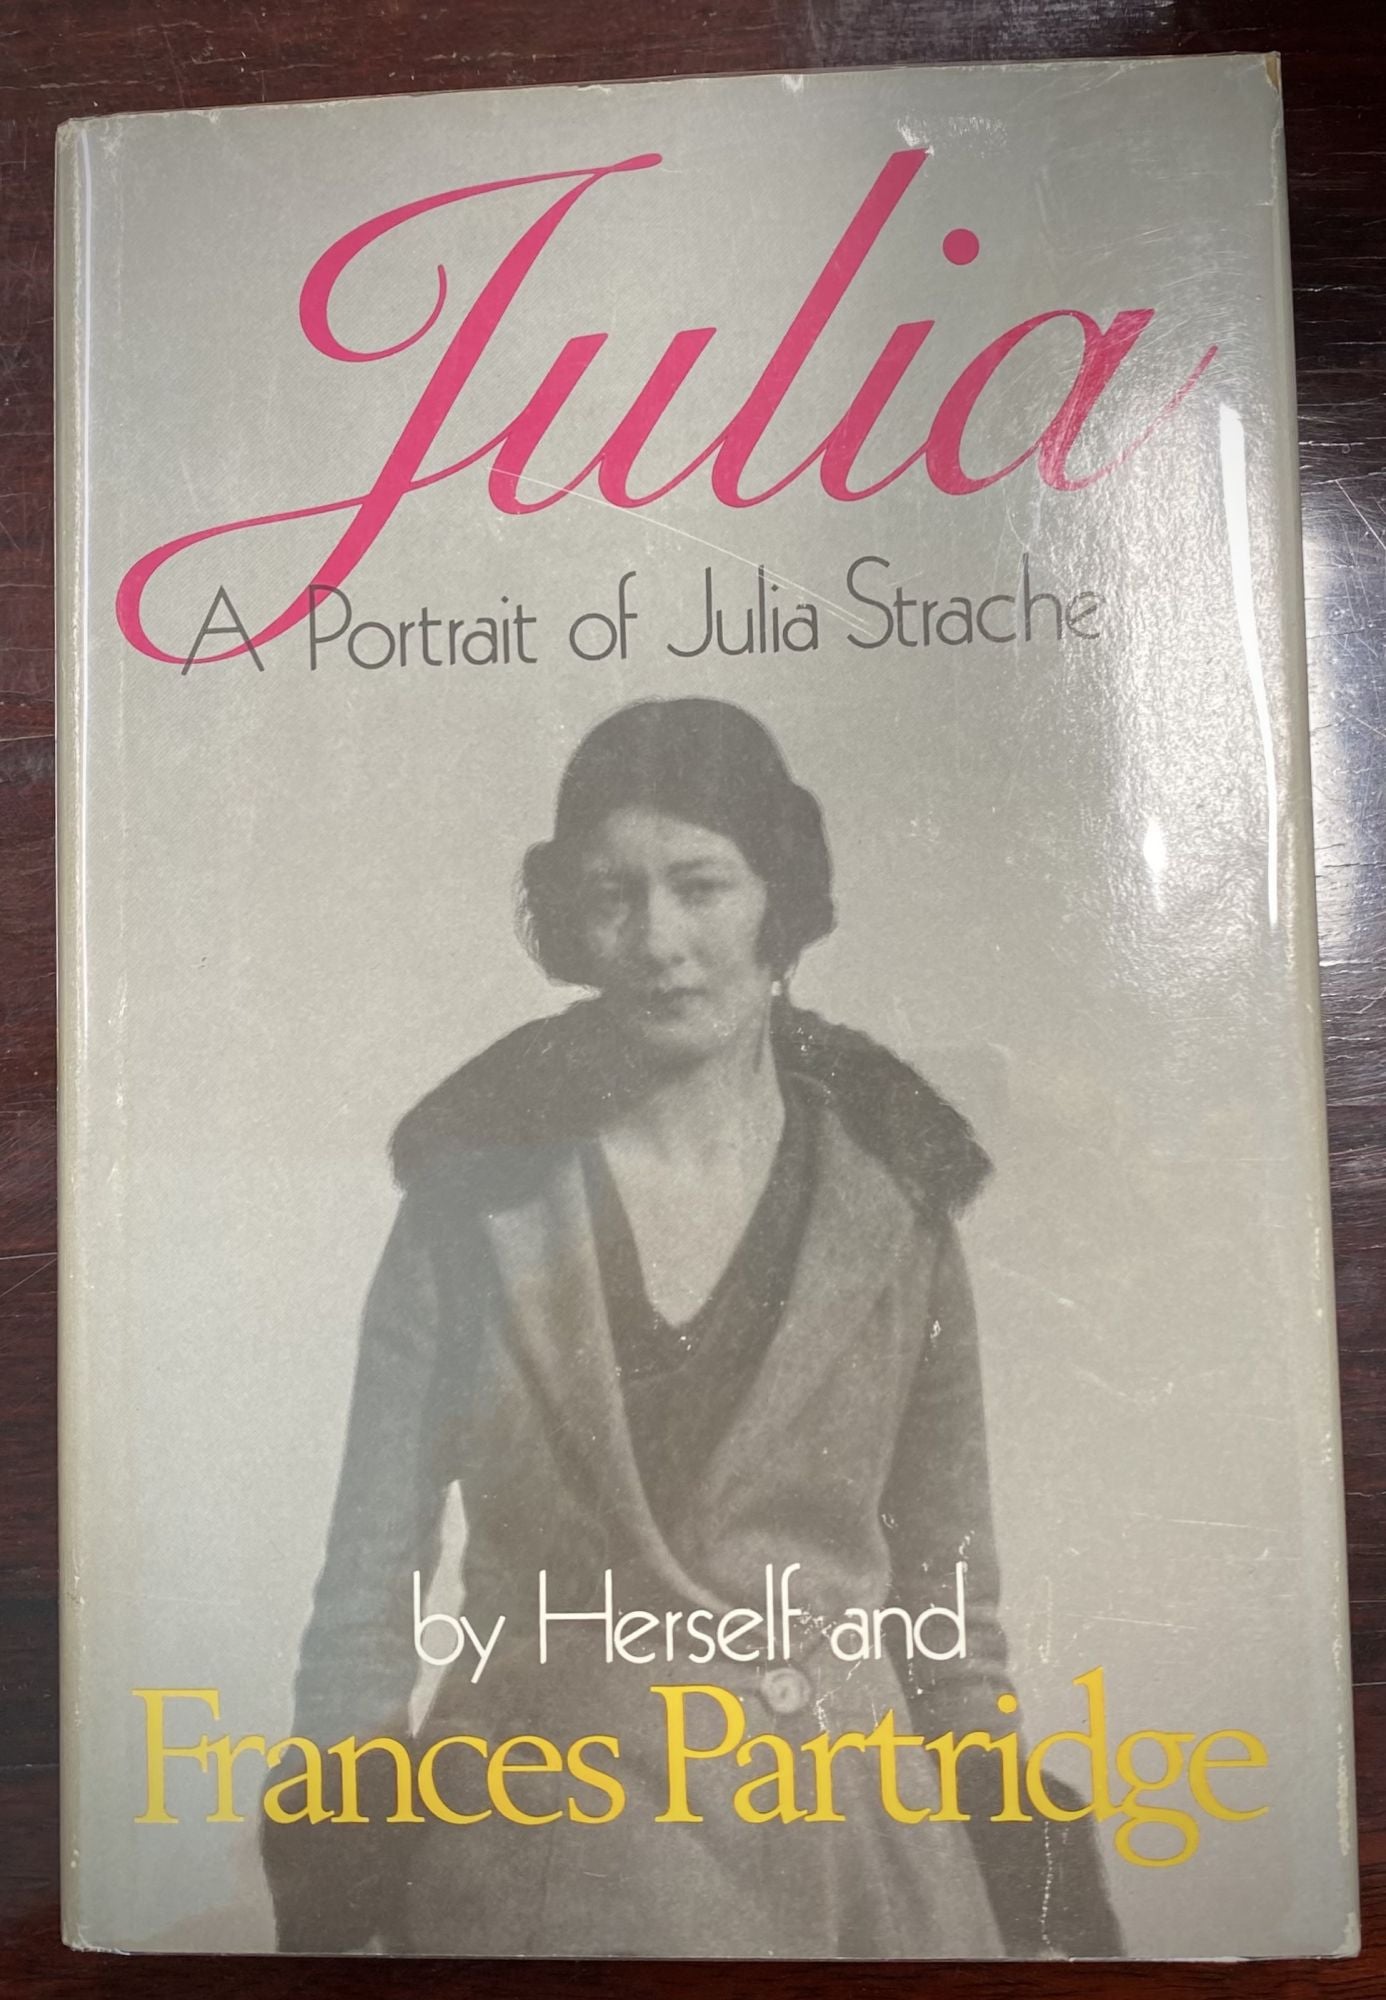 (Bloomsbury Group). Partridge, Frances - Julia. A Portrait of Julia Strachey by Herself and Frances Partridge